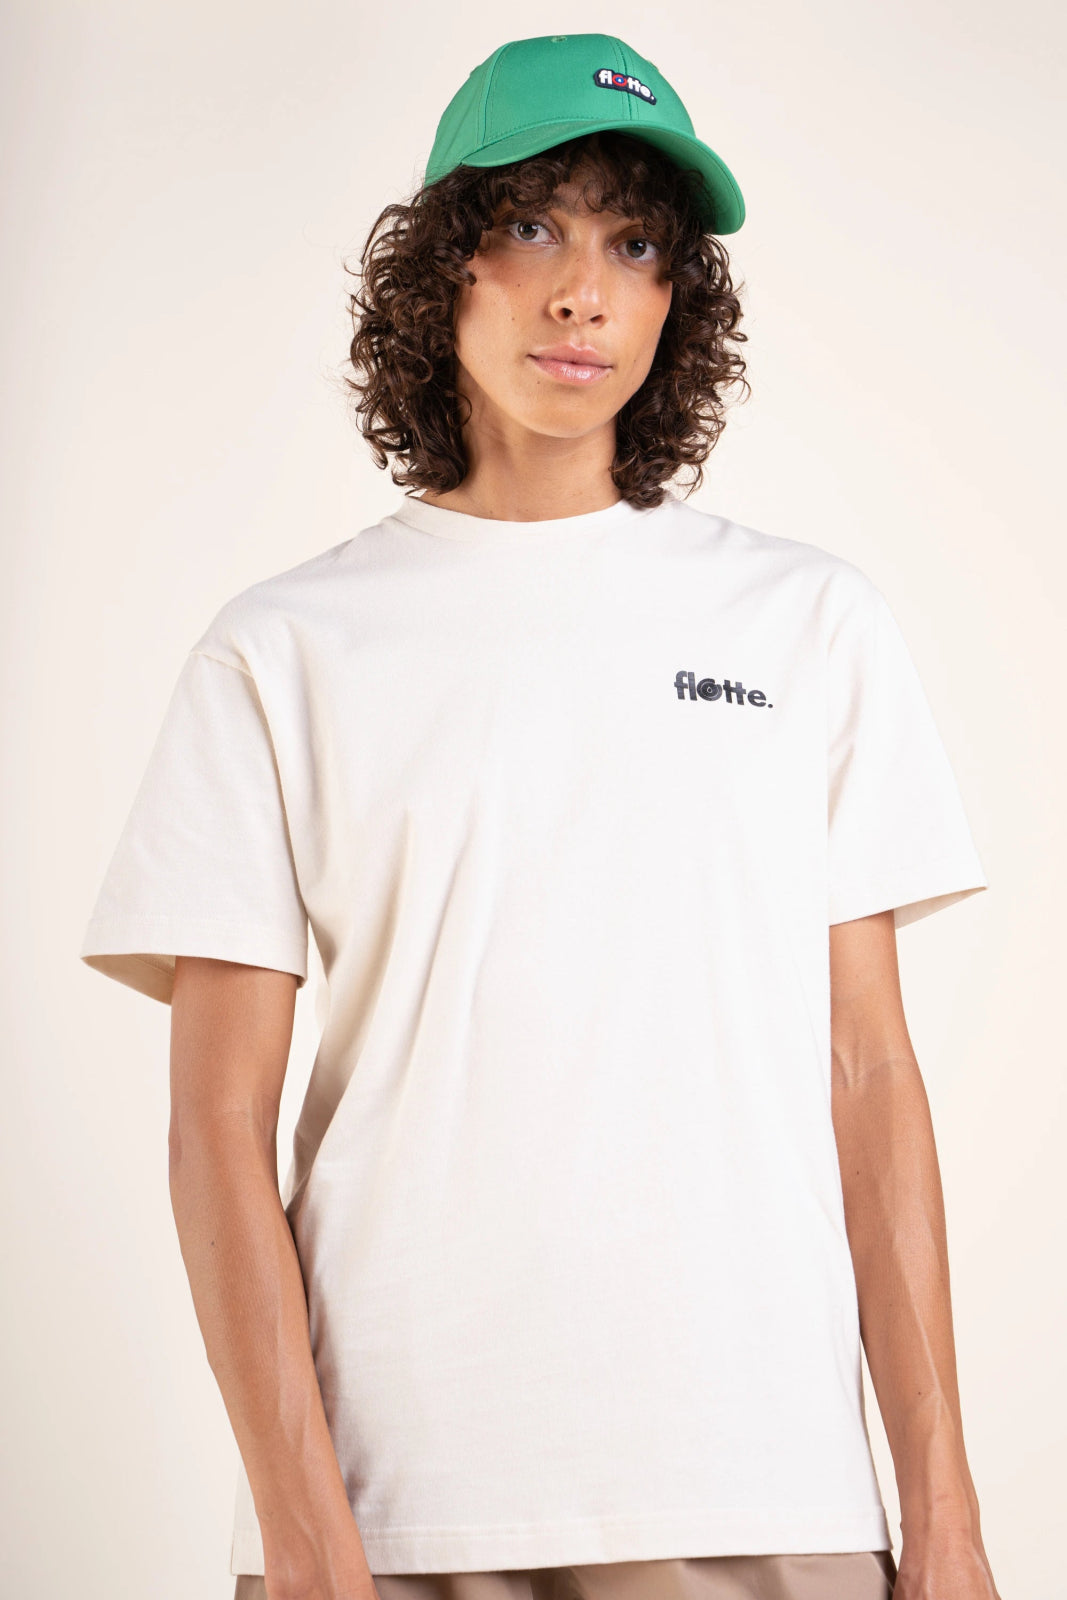 Temple water-repellent T-shirt in 100% cotton, made in Portugal #couleur_creme